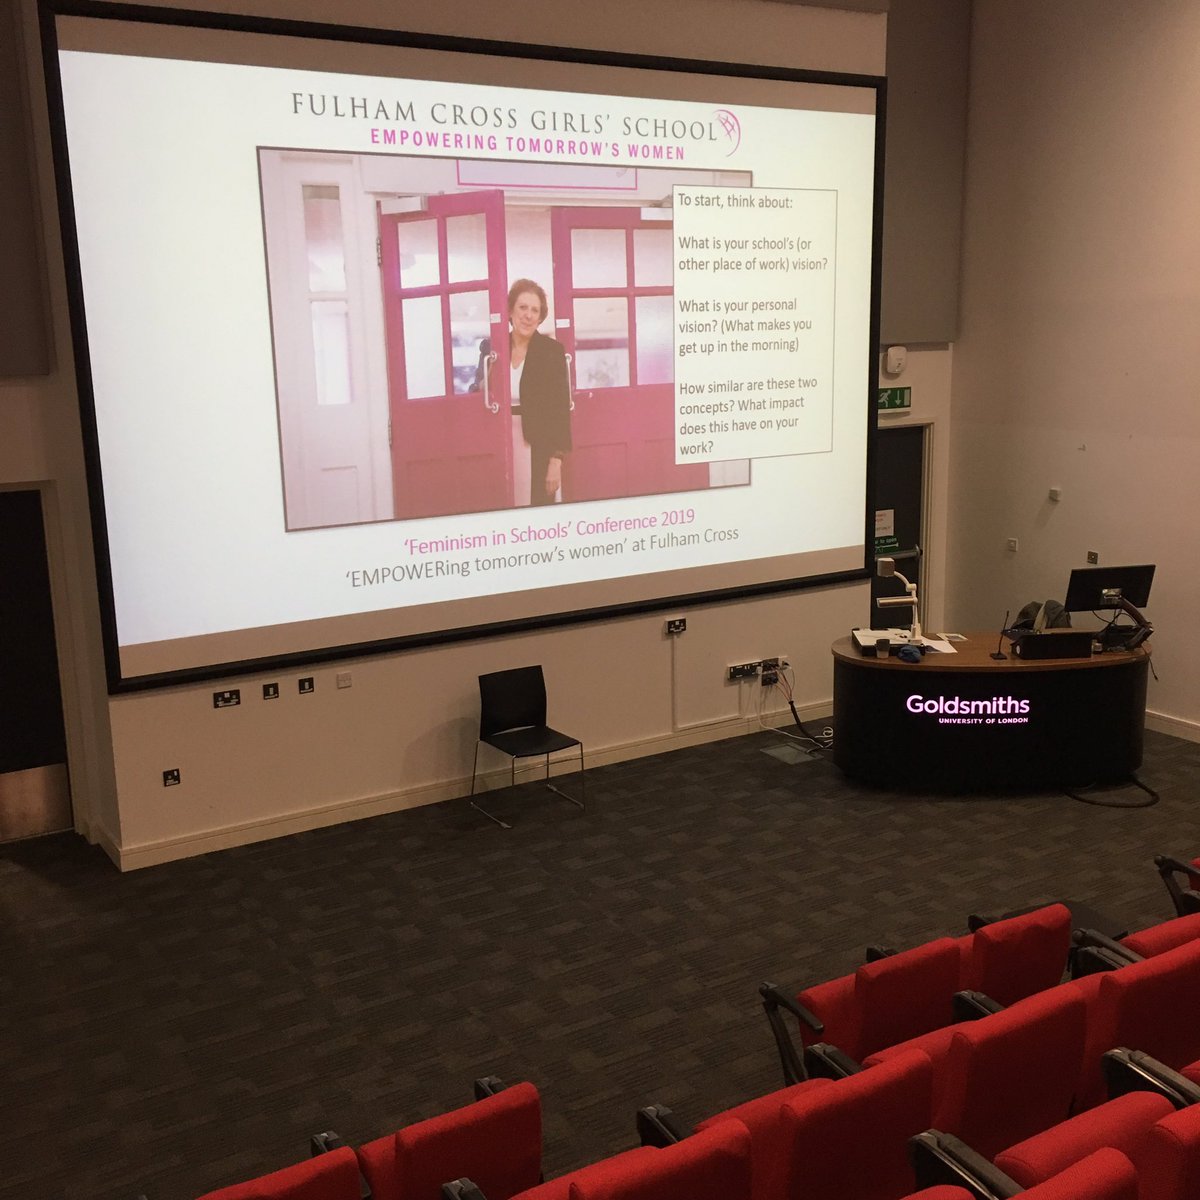 Set up and ready to speak about ‘Empowering Tomorrow’s Women’ with @GurmeetKaur01 at #Goldsmiths today! Reppin’ @FulhamCross from 12.30-13.30 in LG01. #FeminismInSchools